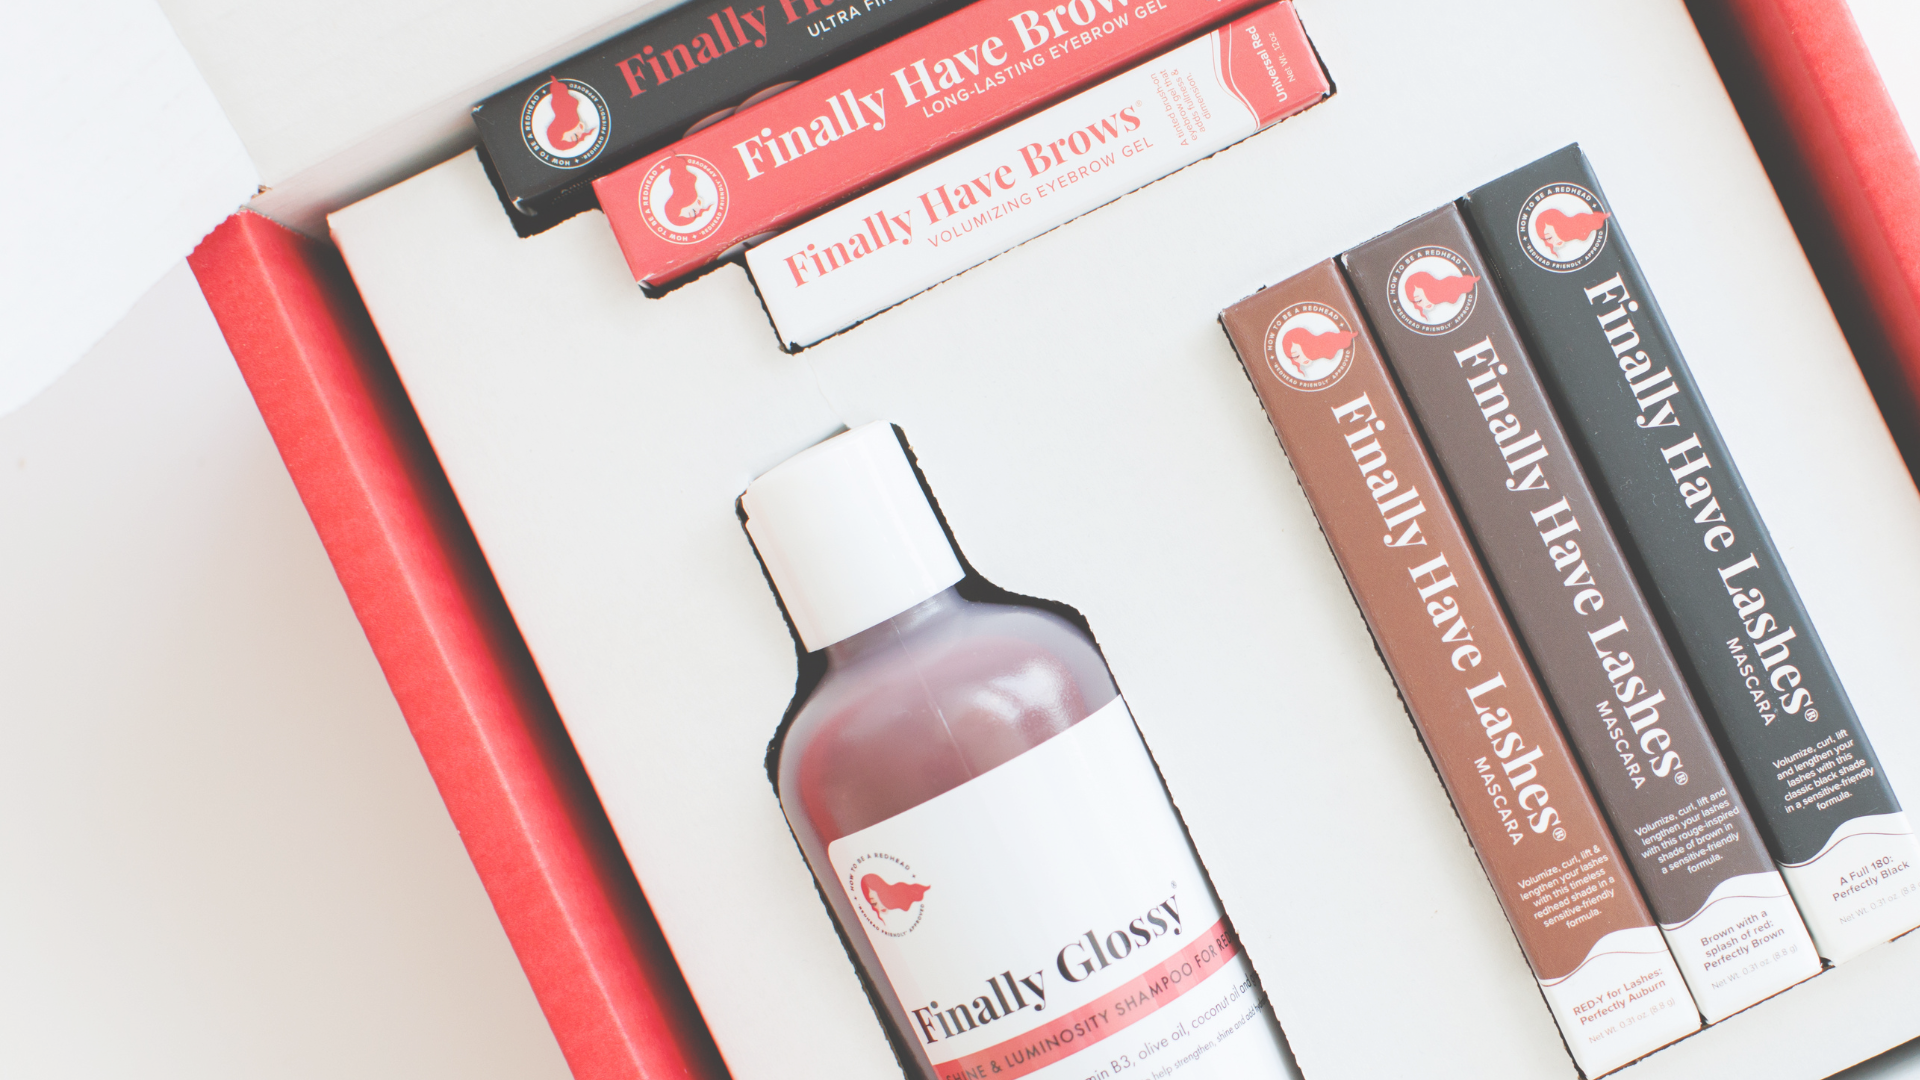 Take A Deep Dive into the Complete 7 Product Redhead Kit